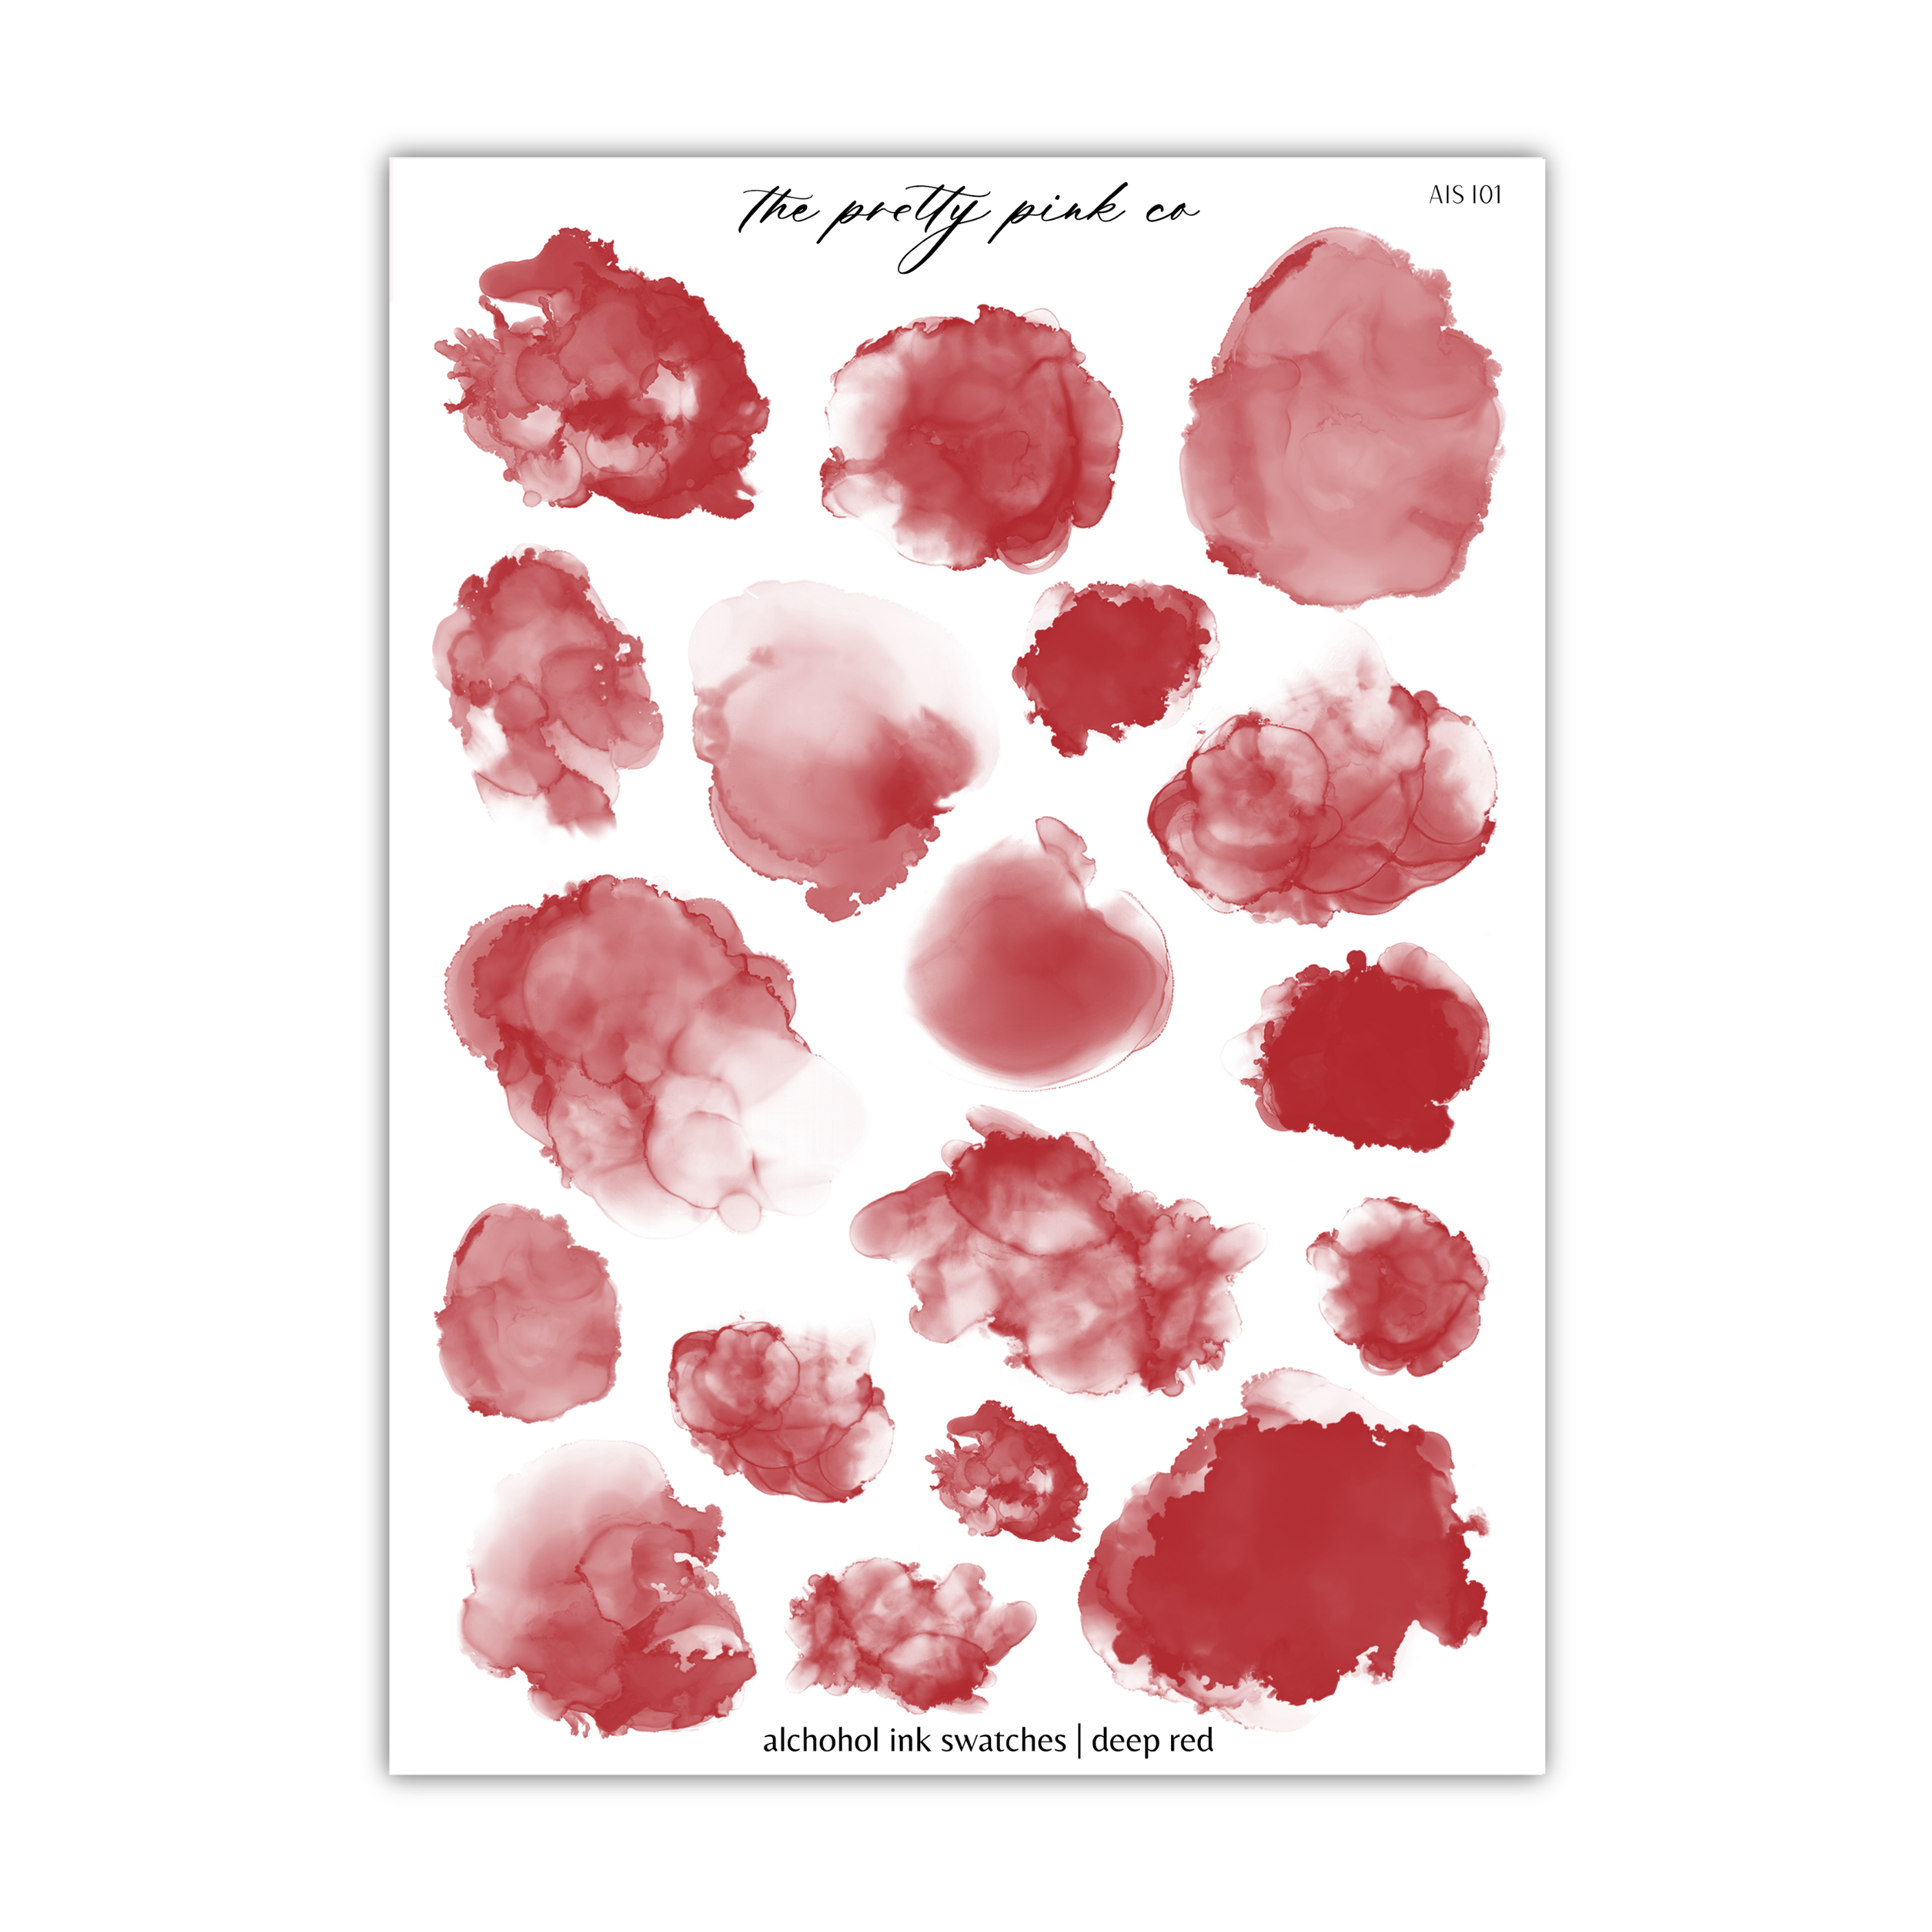 a picture of some red ink on a white background